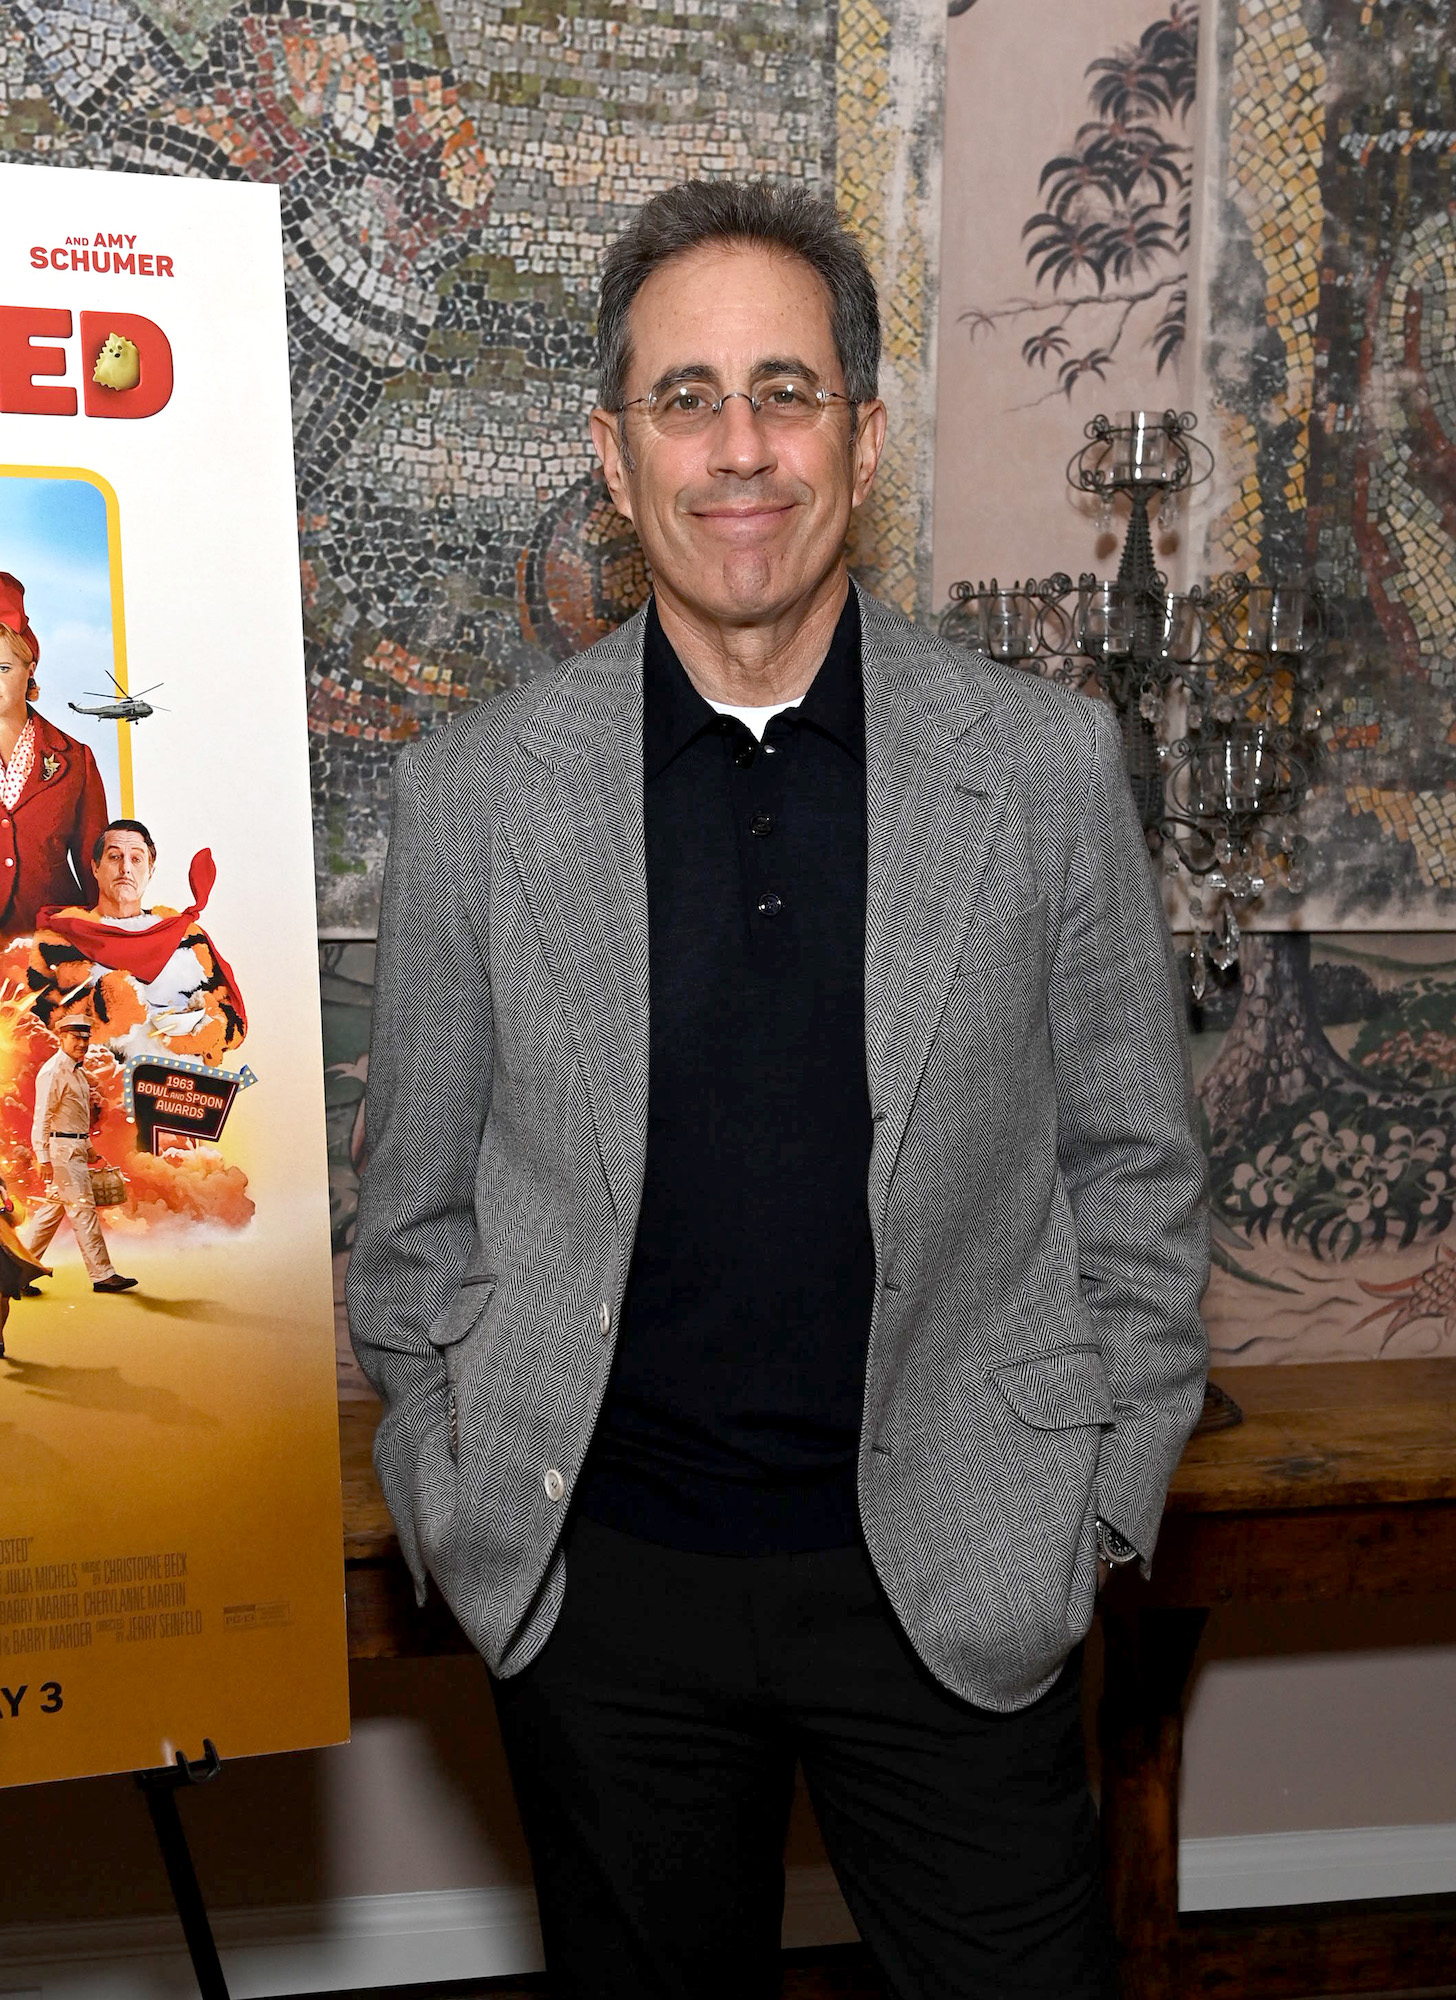 Jerry Seinfeld Says He Couldn’t Make the Same Jokes on 'Seinfeld' Today